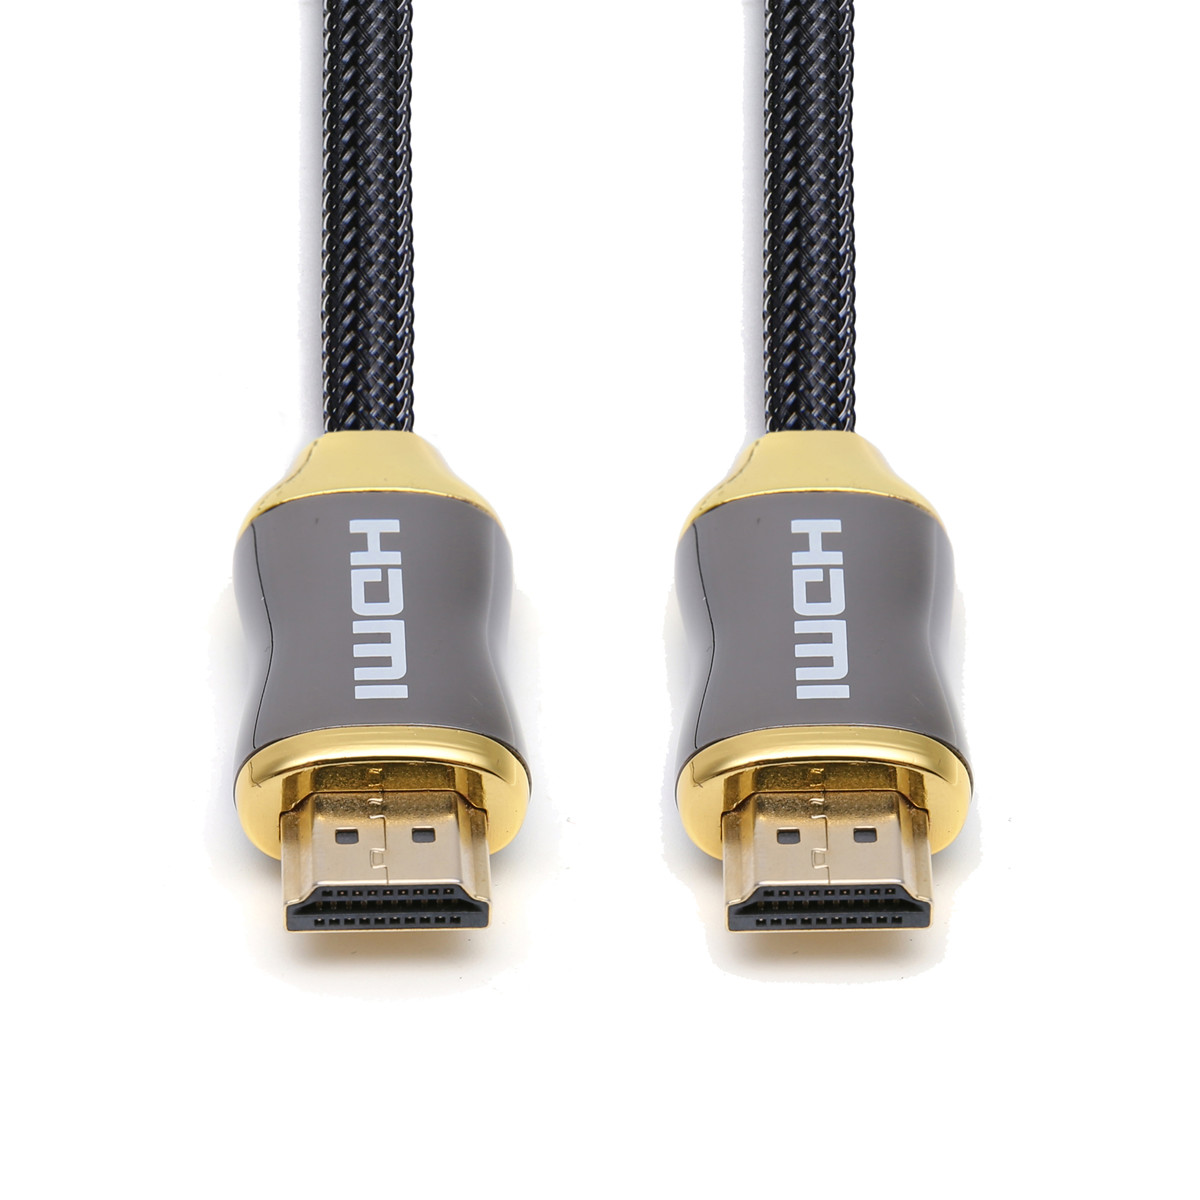 Find 4K HDMI-Compatible 2.0 Cable 2160P High Resolution 4K Full Ultra HD Braided Nylon Video Cable for Sale on Gipsybee.com with cryptocurrencies